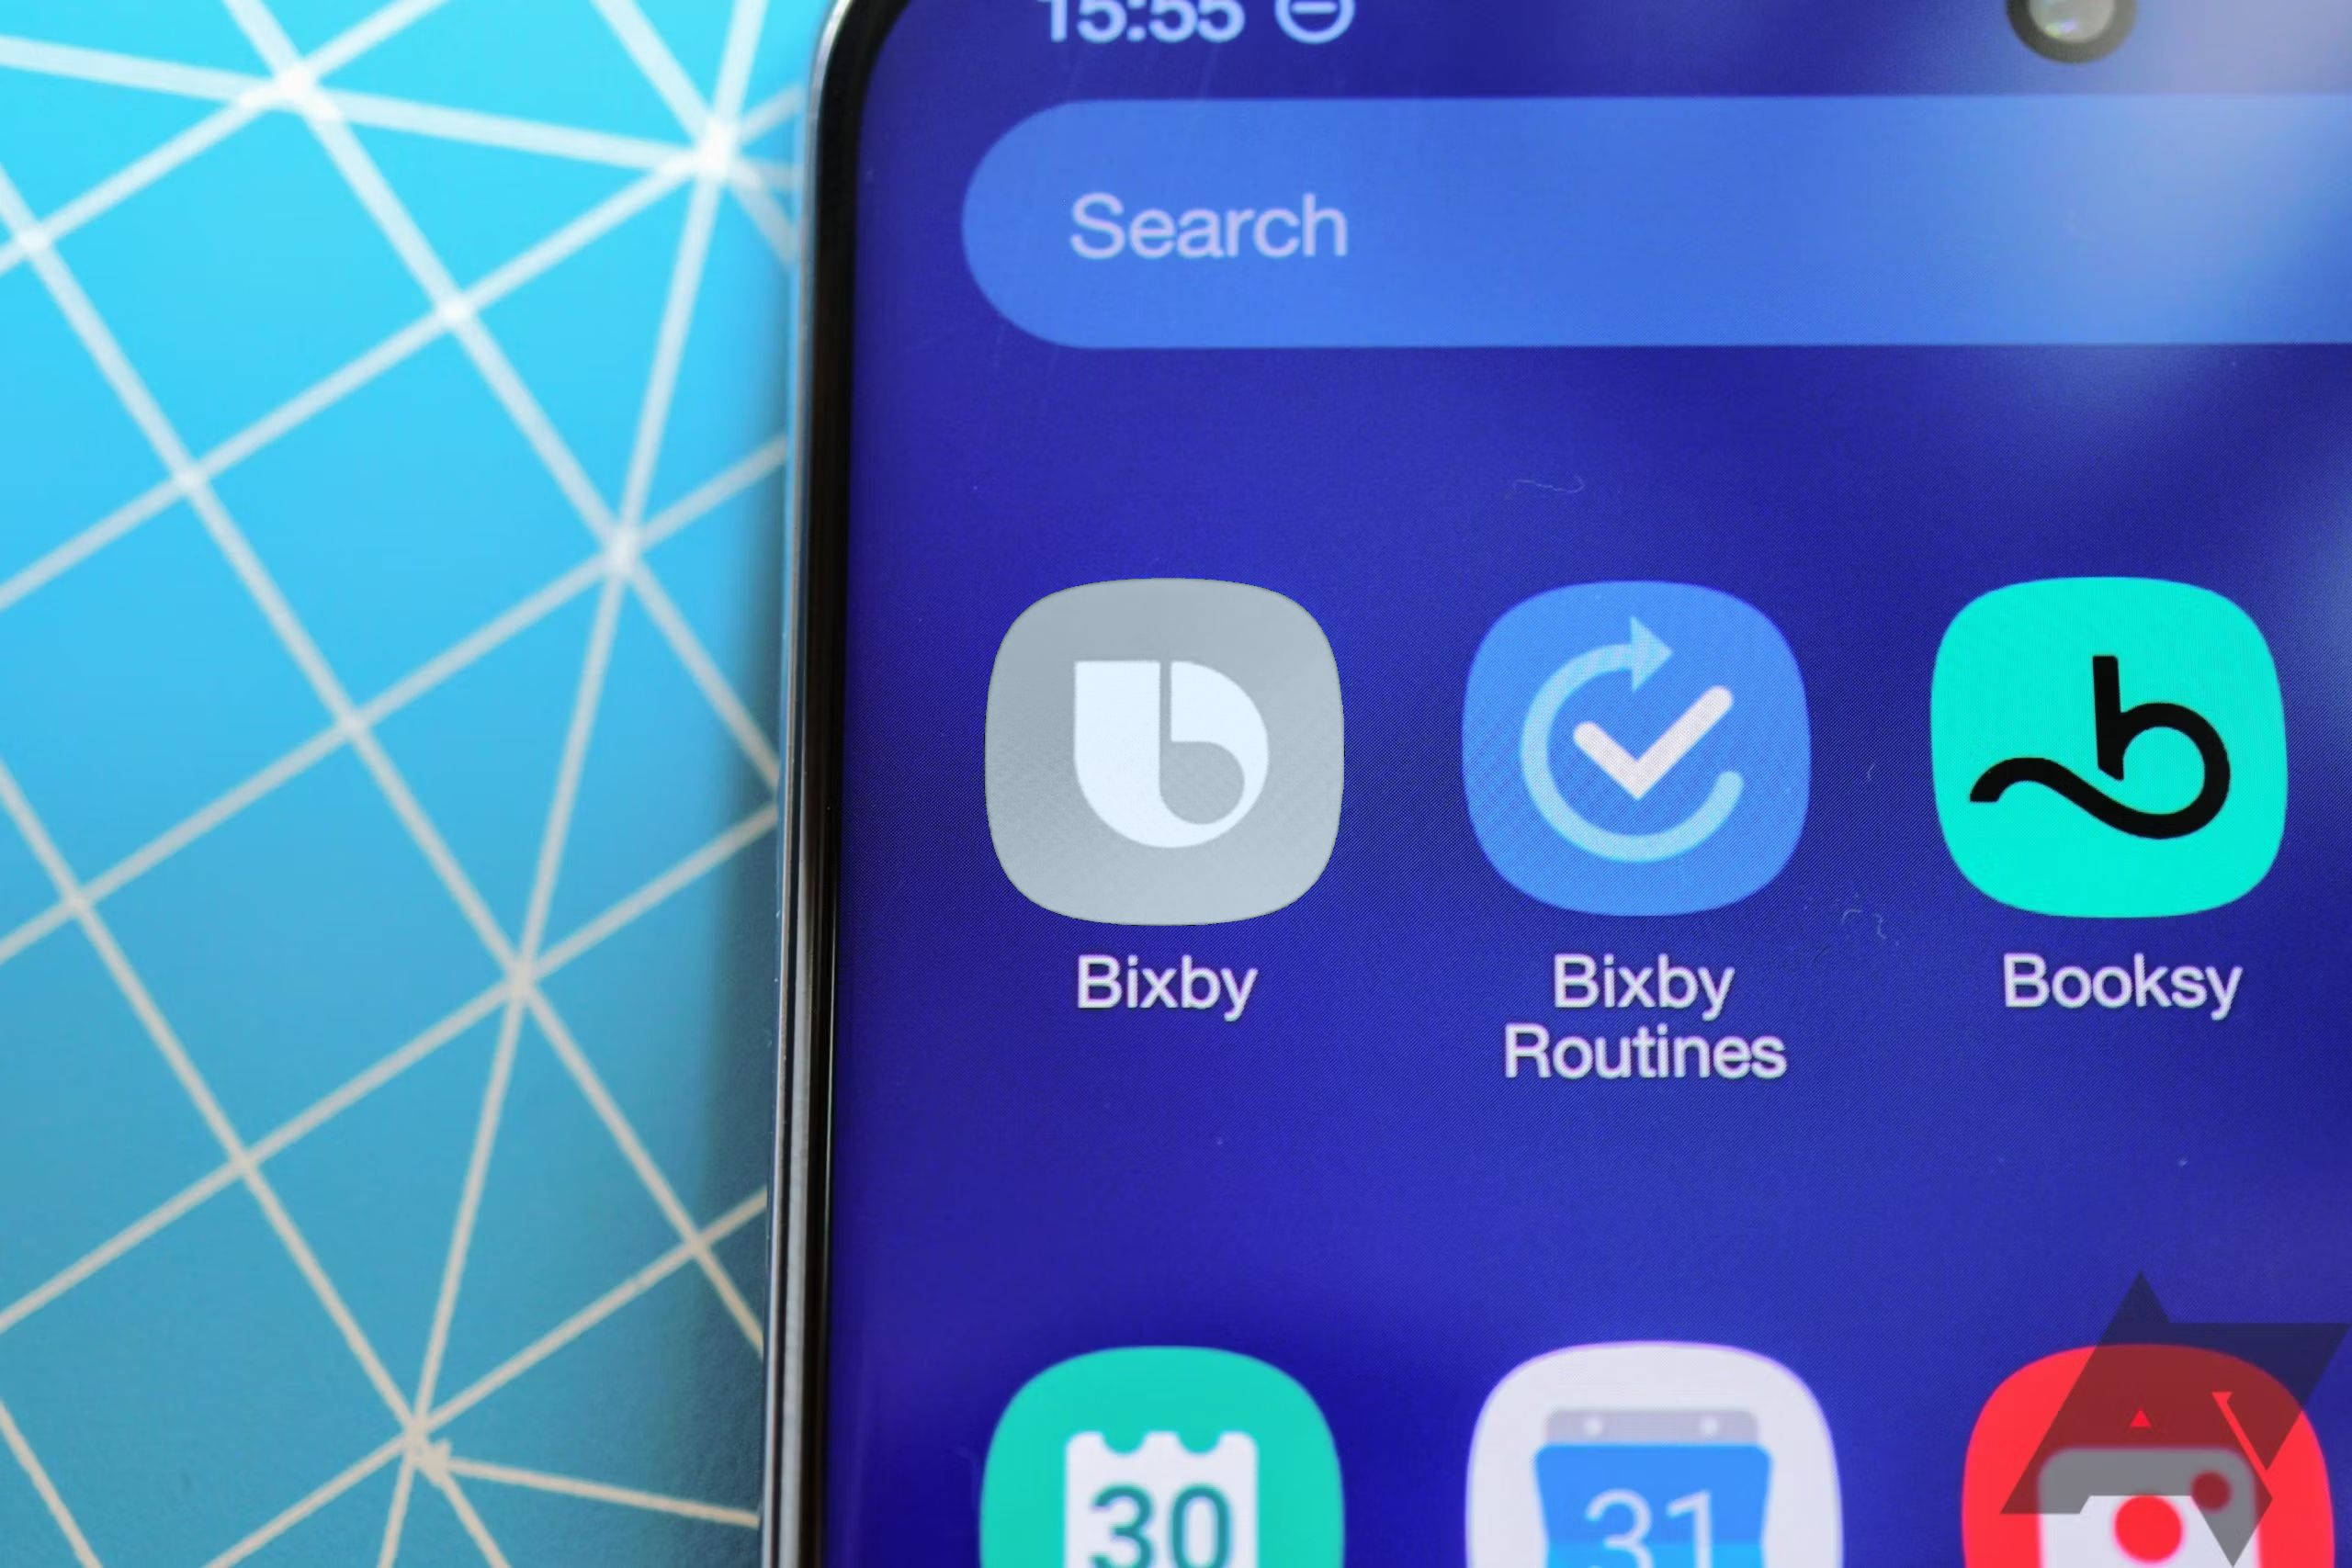 How to totally disable Bixby on your Samsung Galaxy phone or tablet